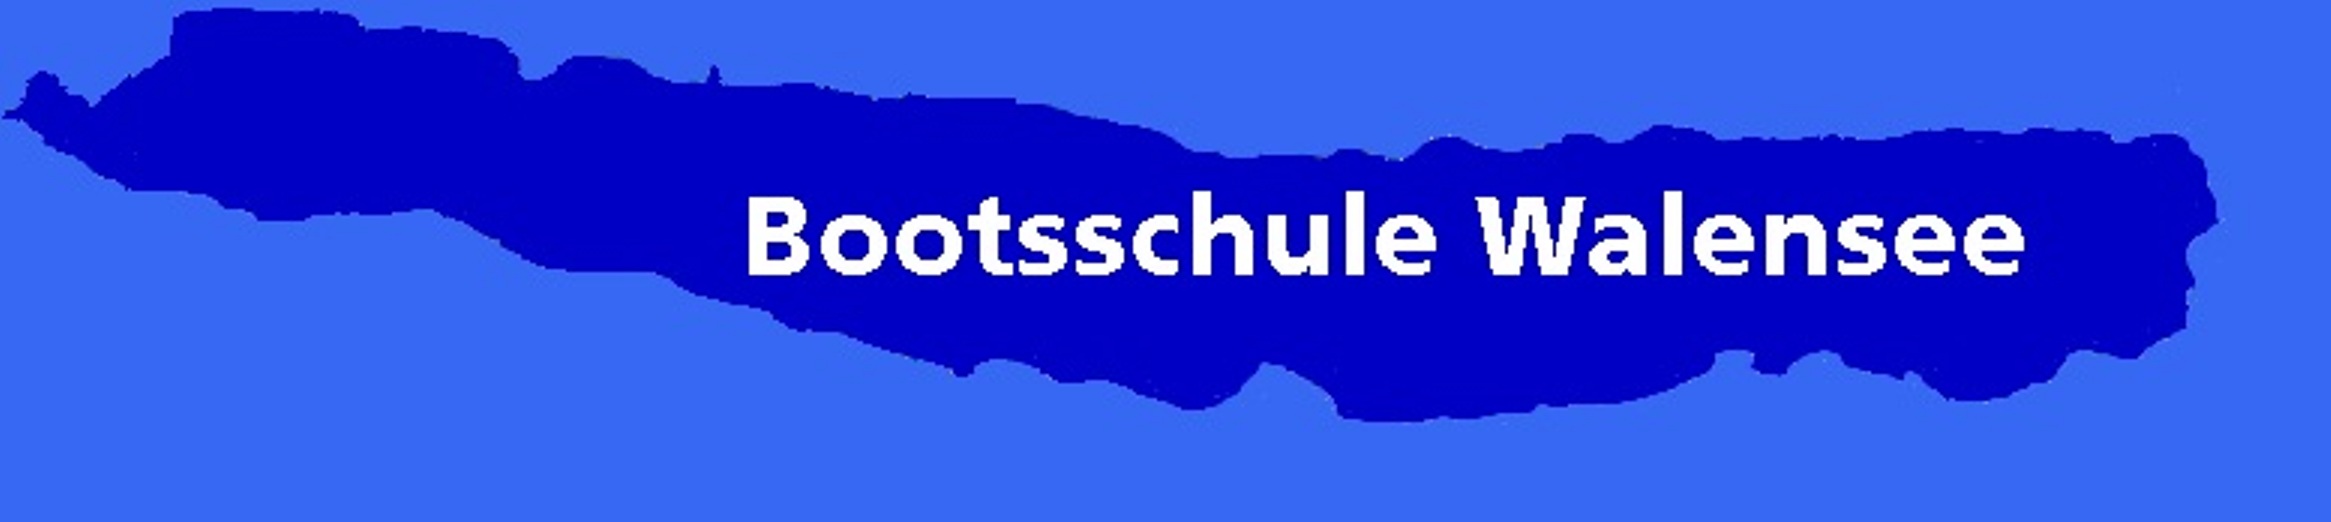 Bootsschule-Walensee